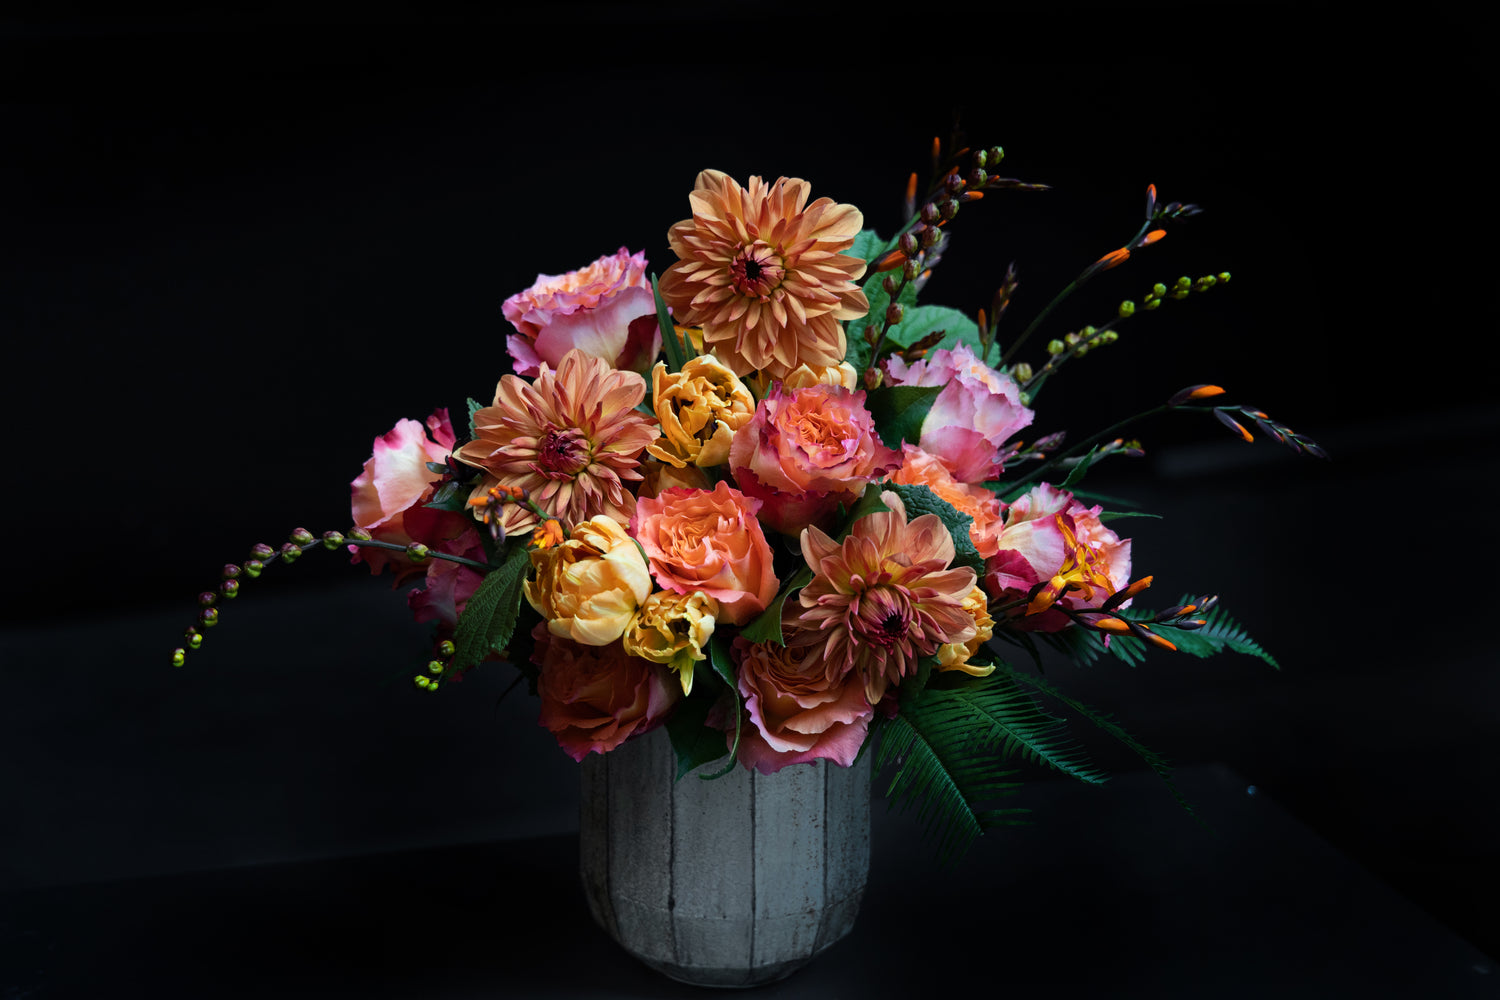 This unique arrangement of flowers will form a most pleasant gift for different occasions, may be used as a center piece at a dinner or just to decorate. The clever arrangements of the orange and yellow dahlias, roses and carnations is attractive